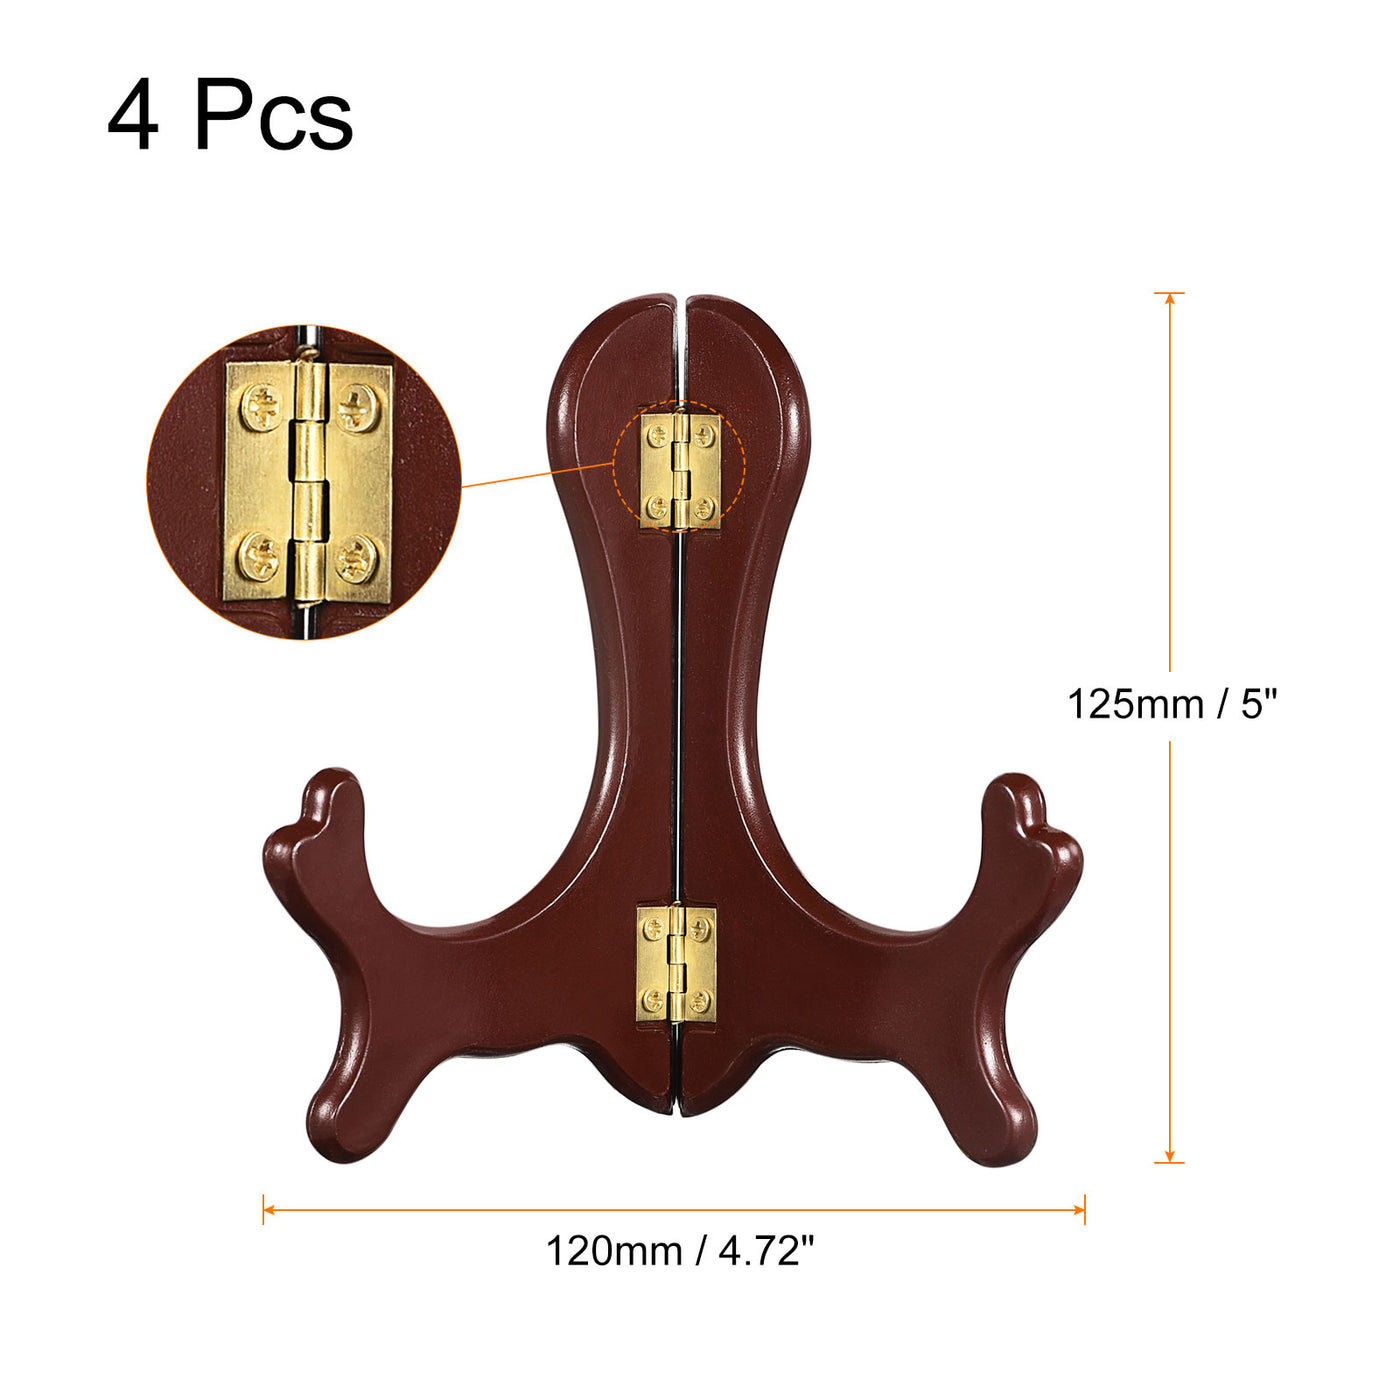 uxcell Uxcell 4pcs 5" Easel Plate Holder, Wood-like Plastic Folding Display Stand Brown for Decorative Picture Frame